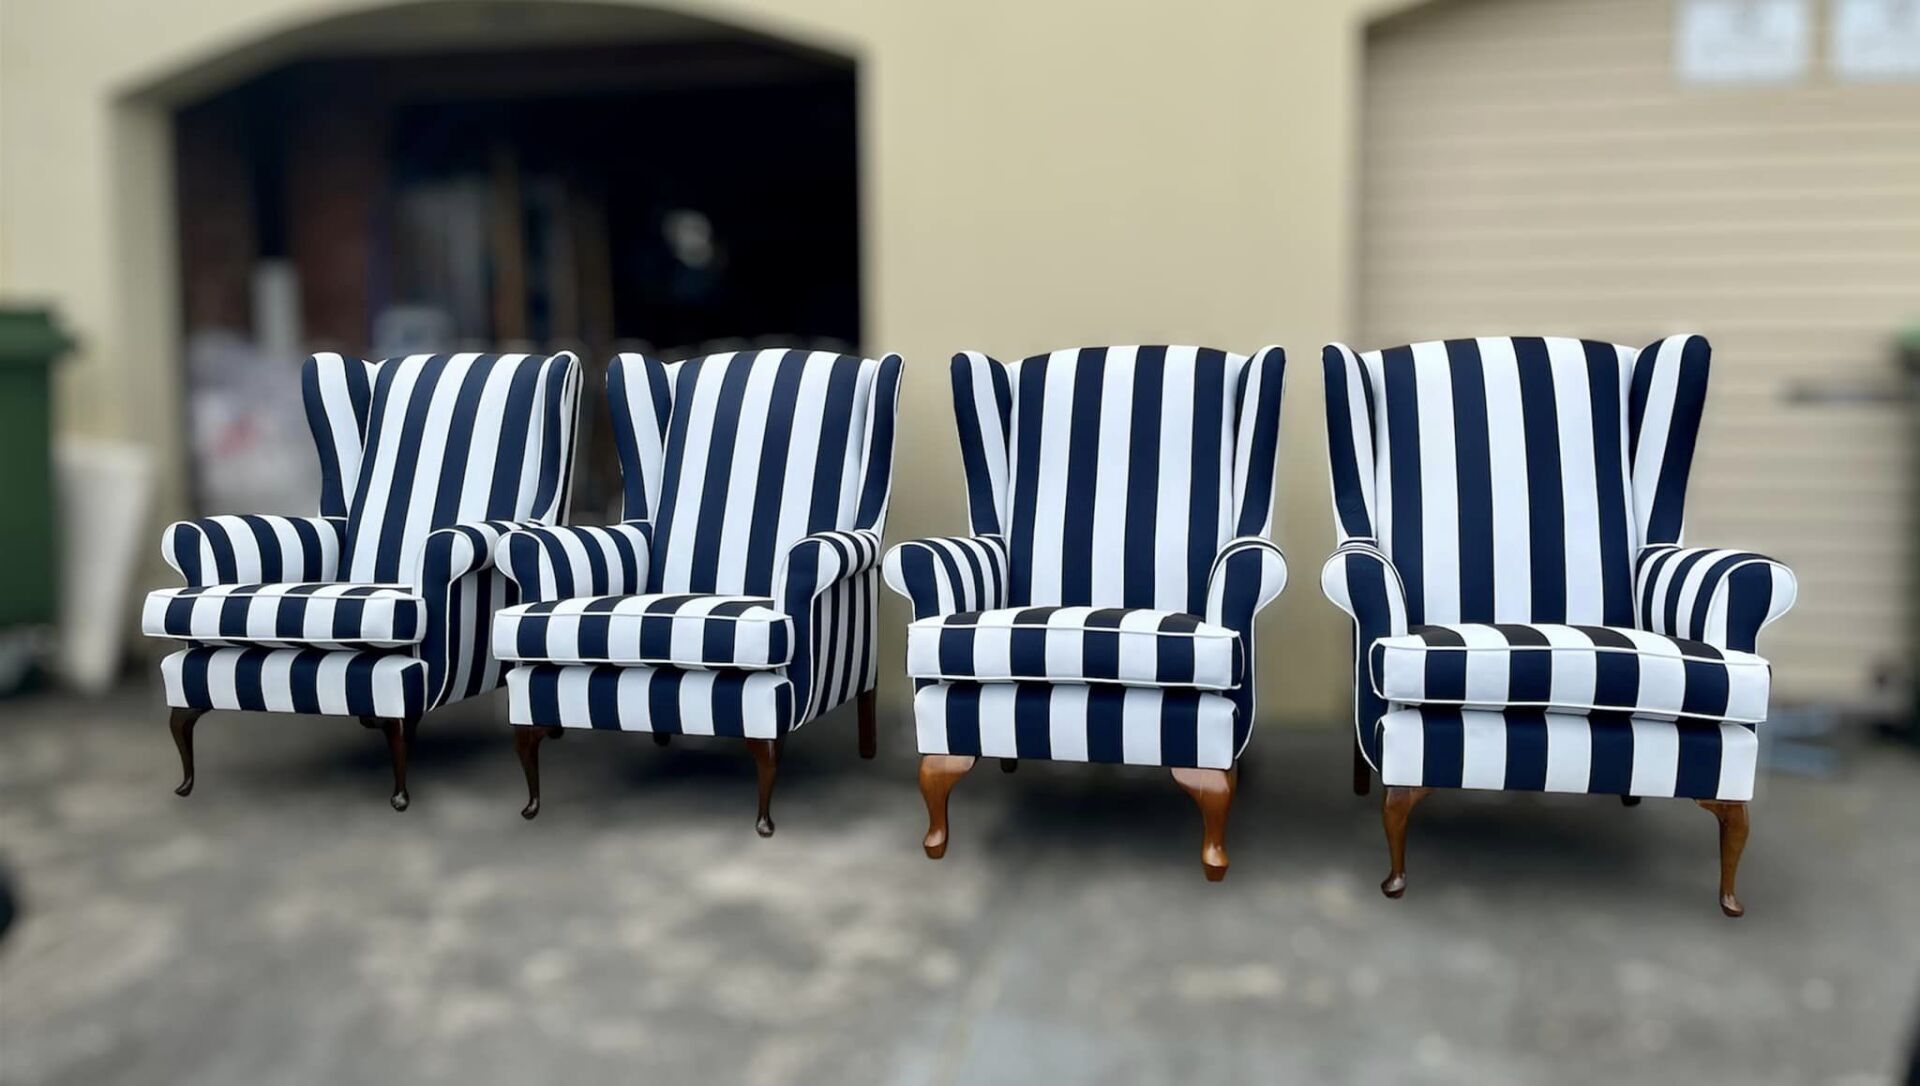 Waiting Seats — Metreson Upholstery in Unanderra, NSW